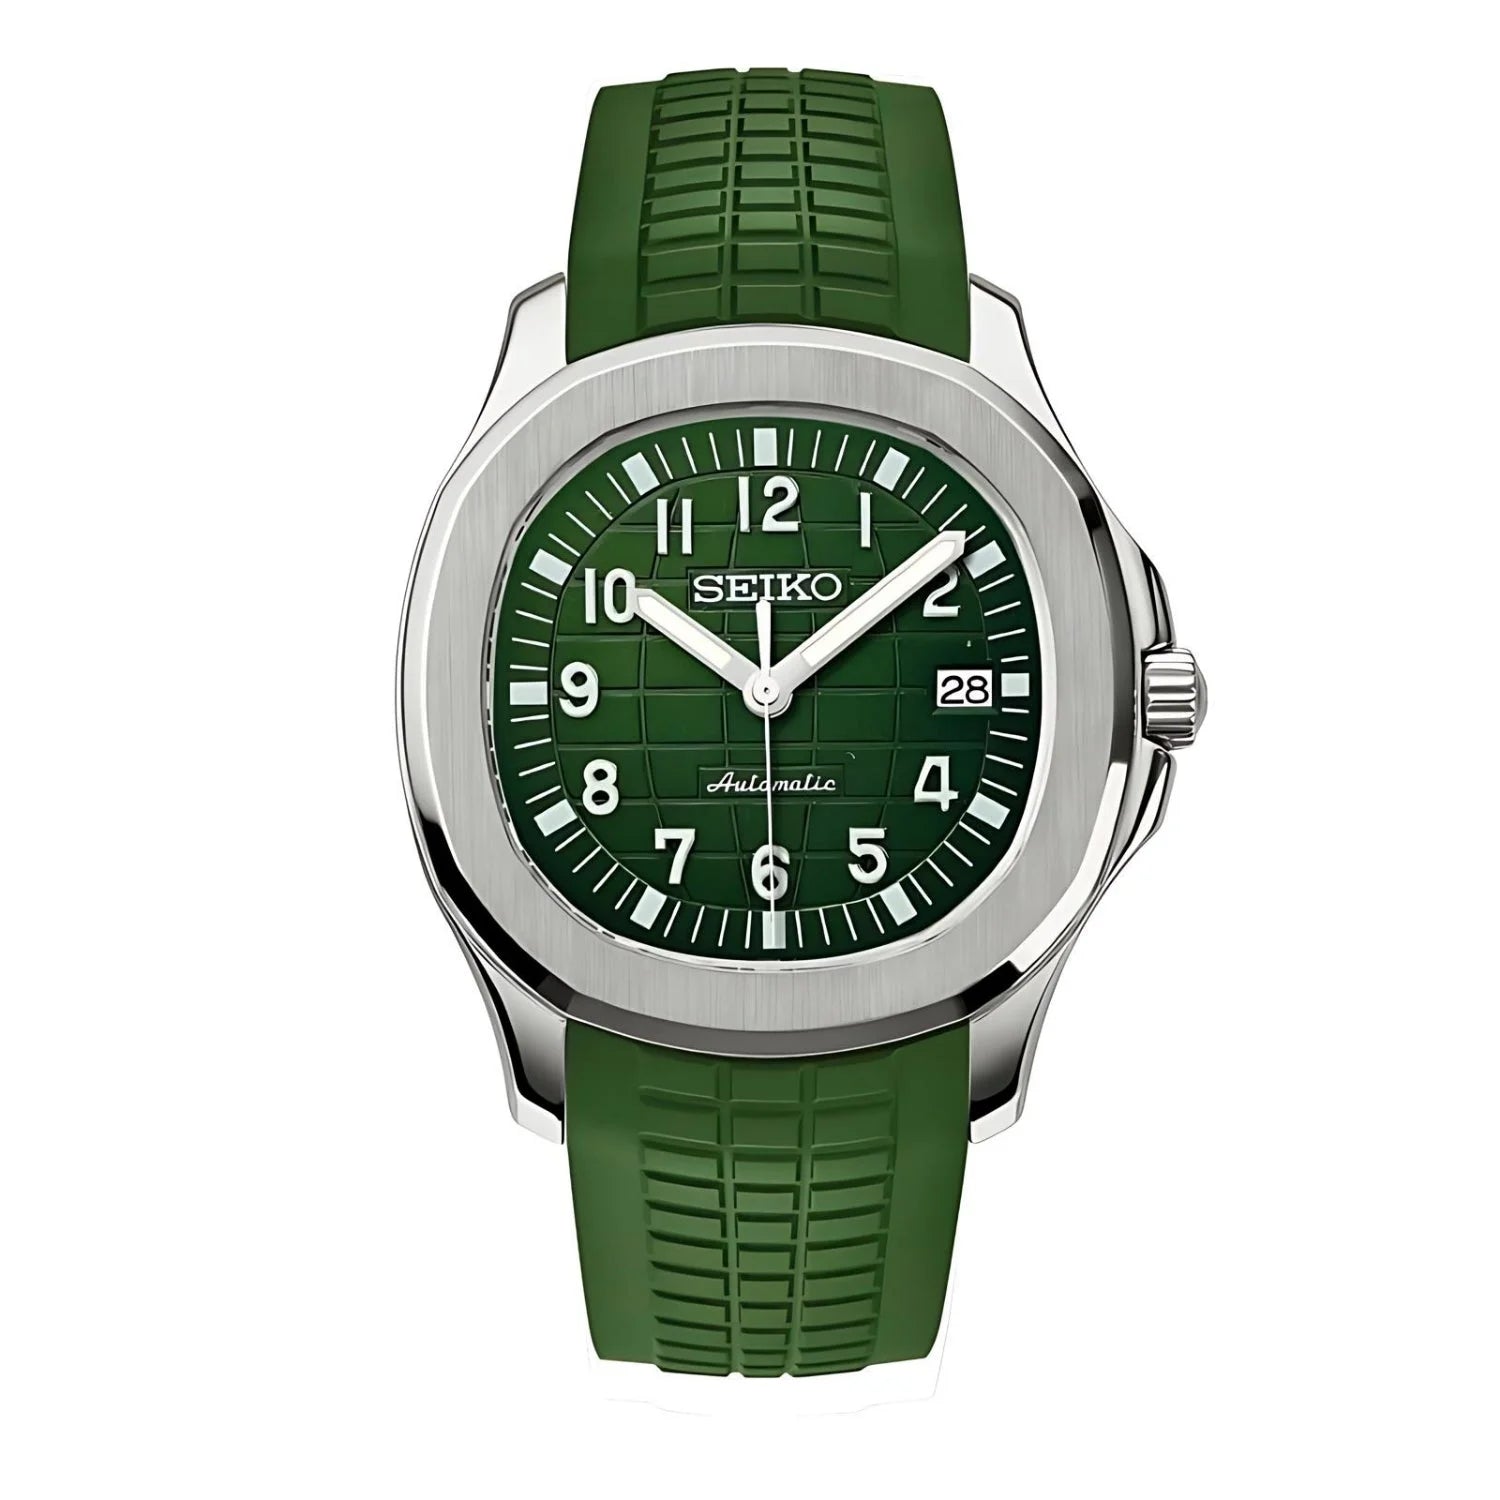 Seikonaut Green Seiko Automatic Watch With Silver Case And Rubber Strap